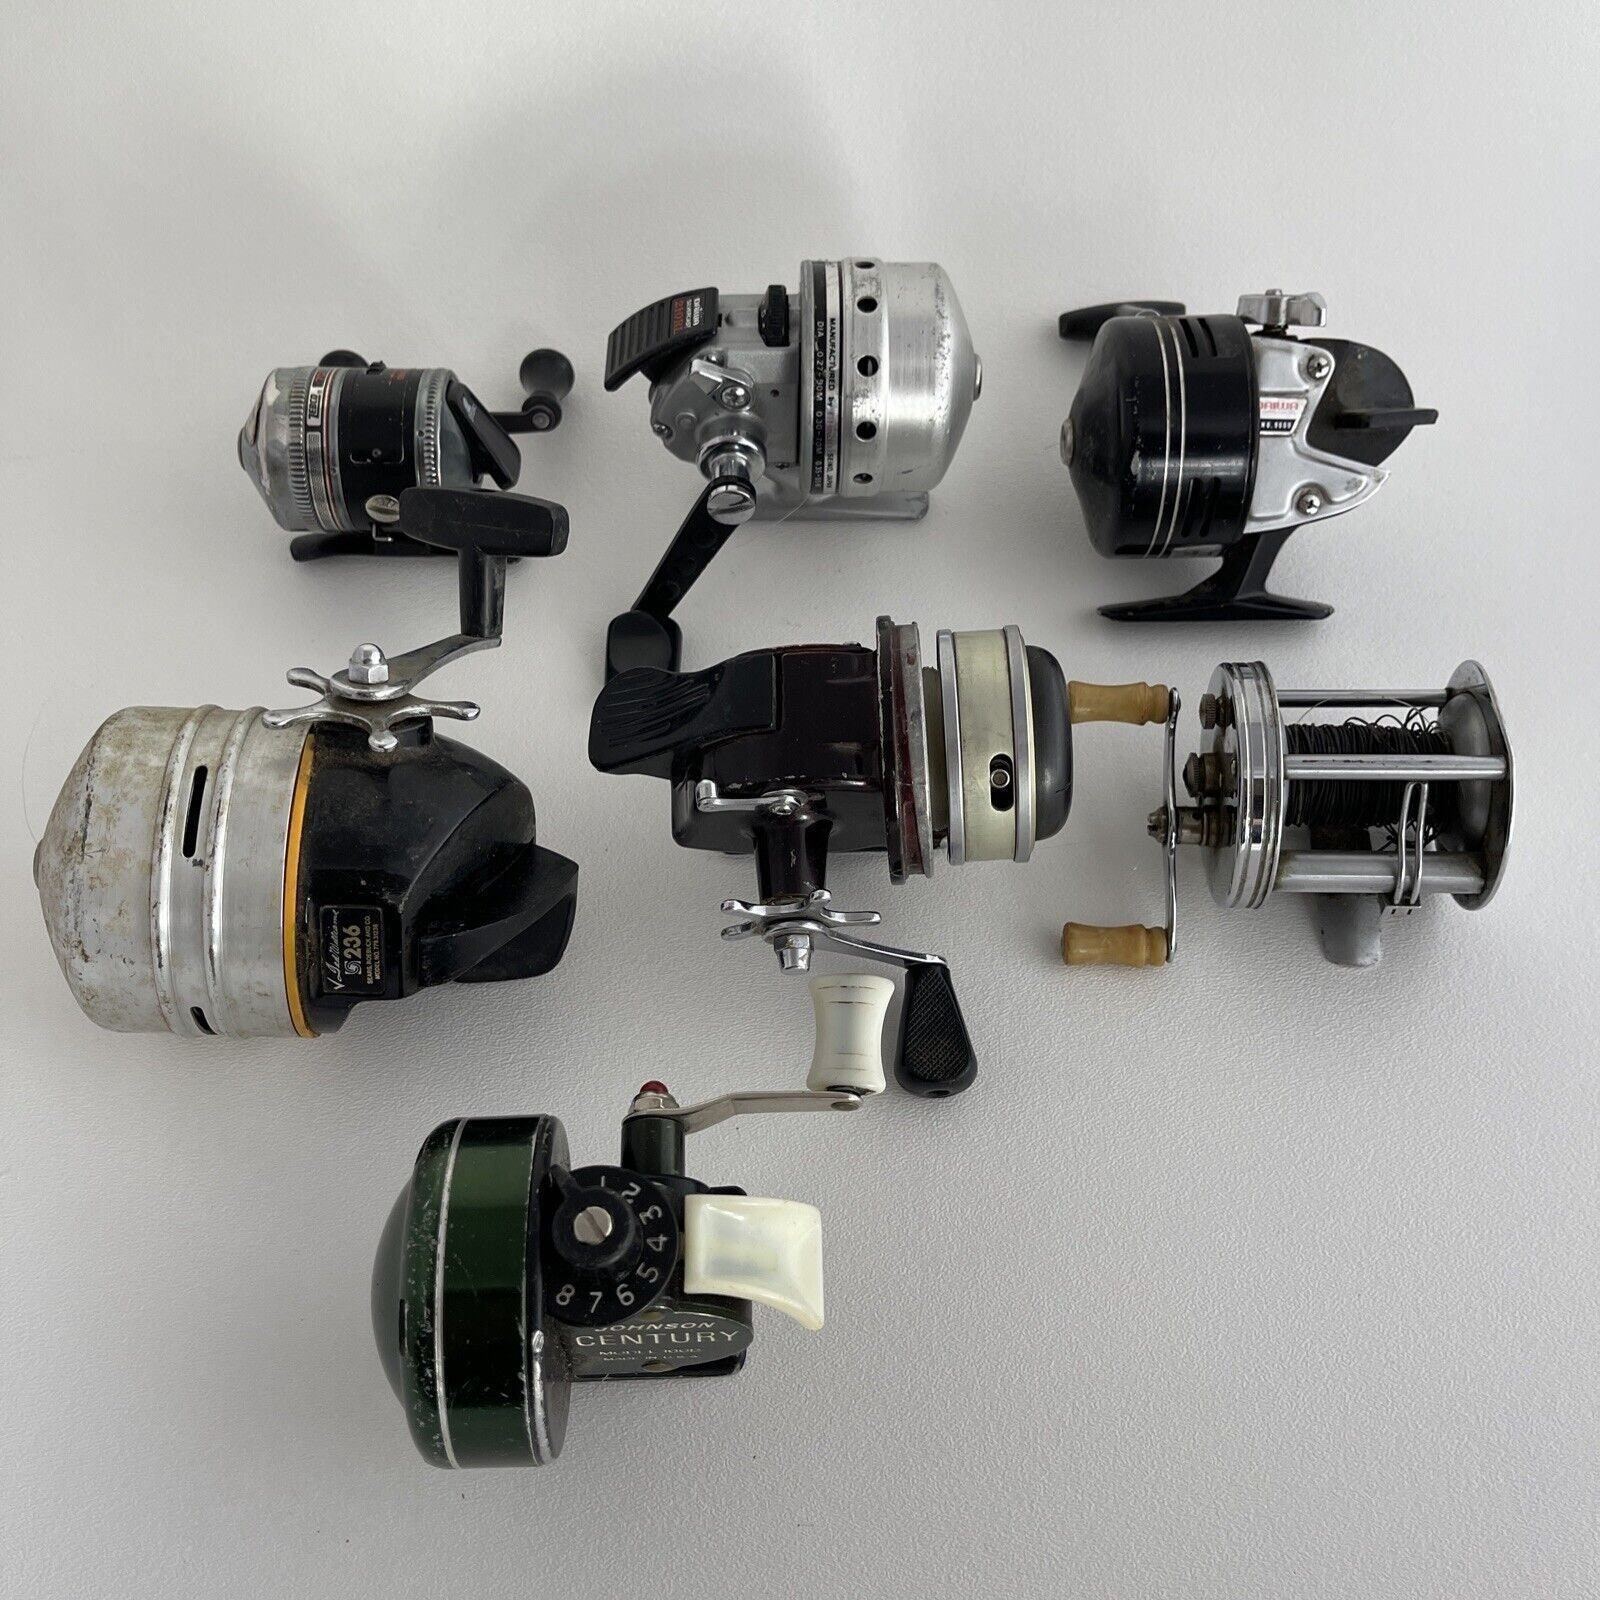 Lot of 7 Fishing Reels May Need Work -Johnson Century 45, Ted Williams 236  +More